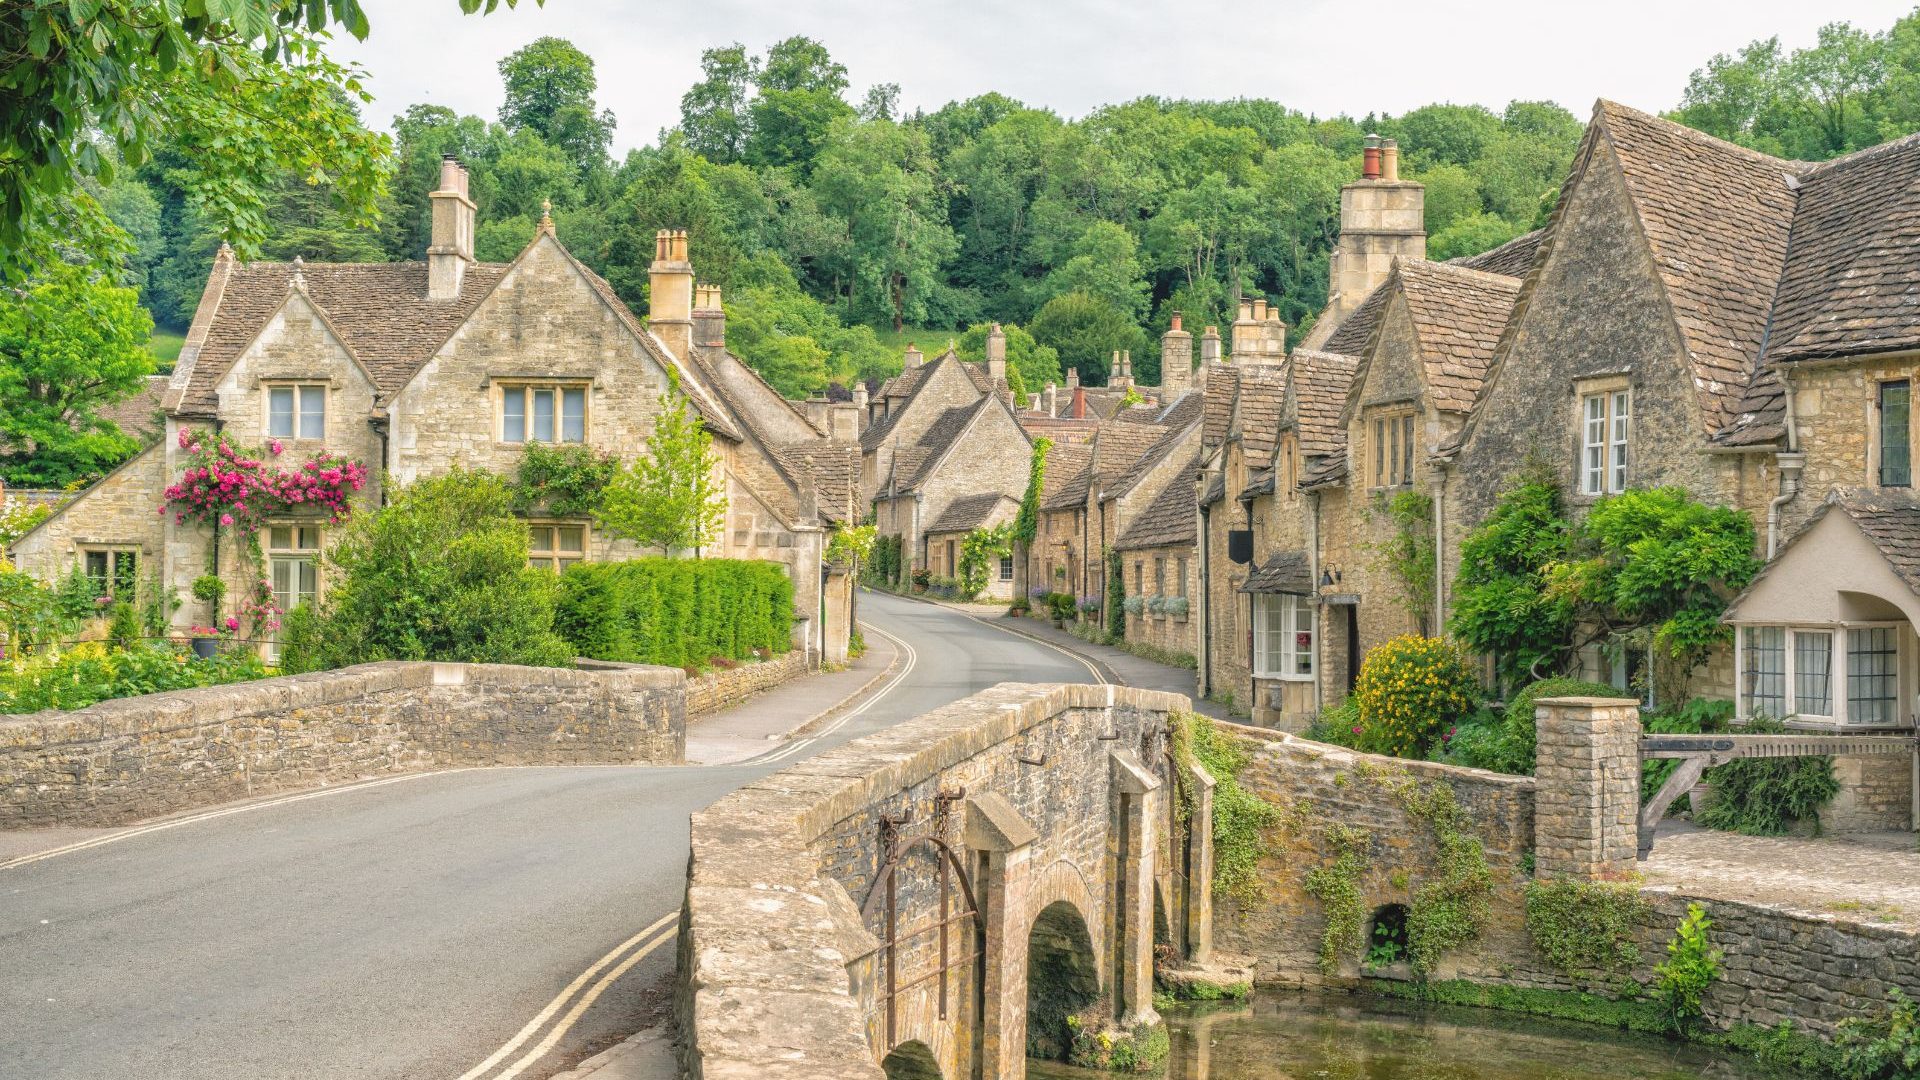 Village of Castle Combe in the Cotswolds, Wiltshire, UK. Bridge over River Bybrook